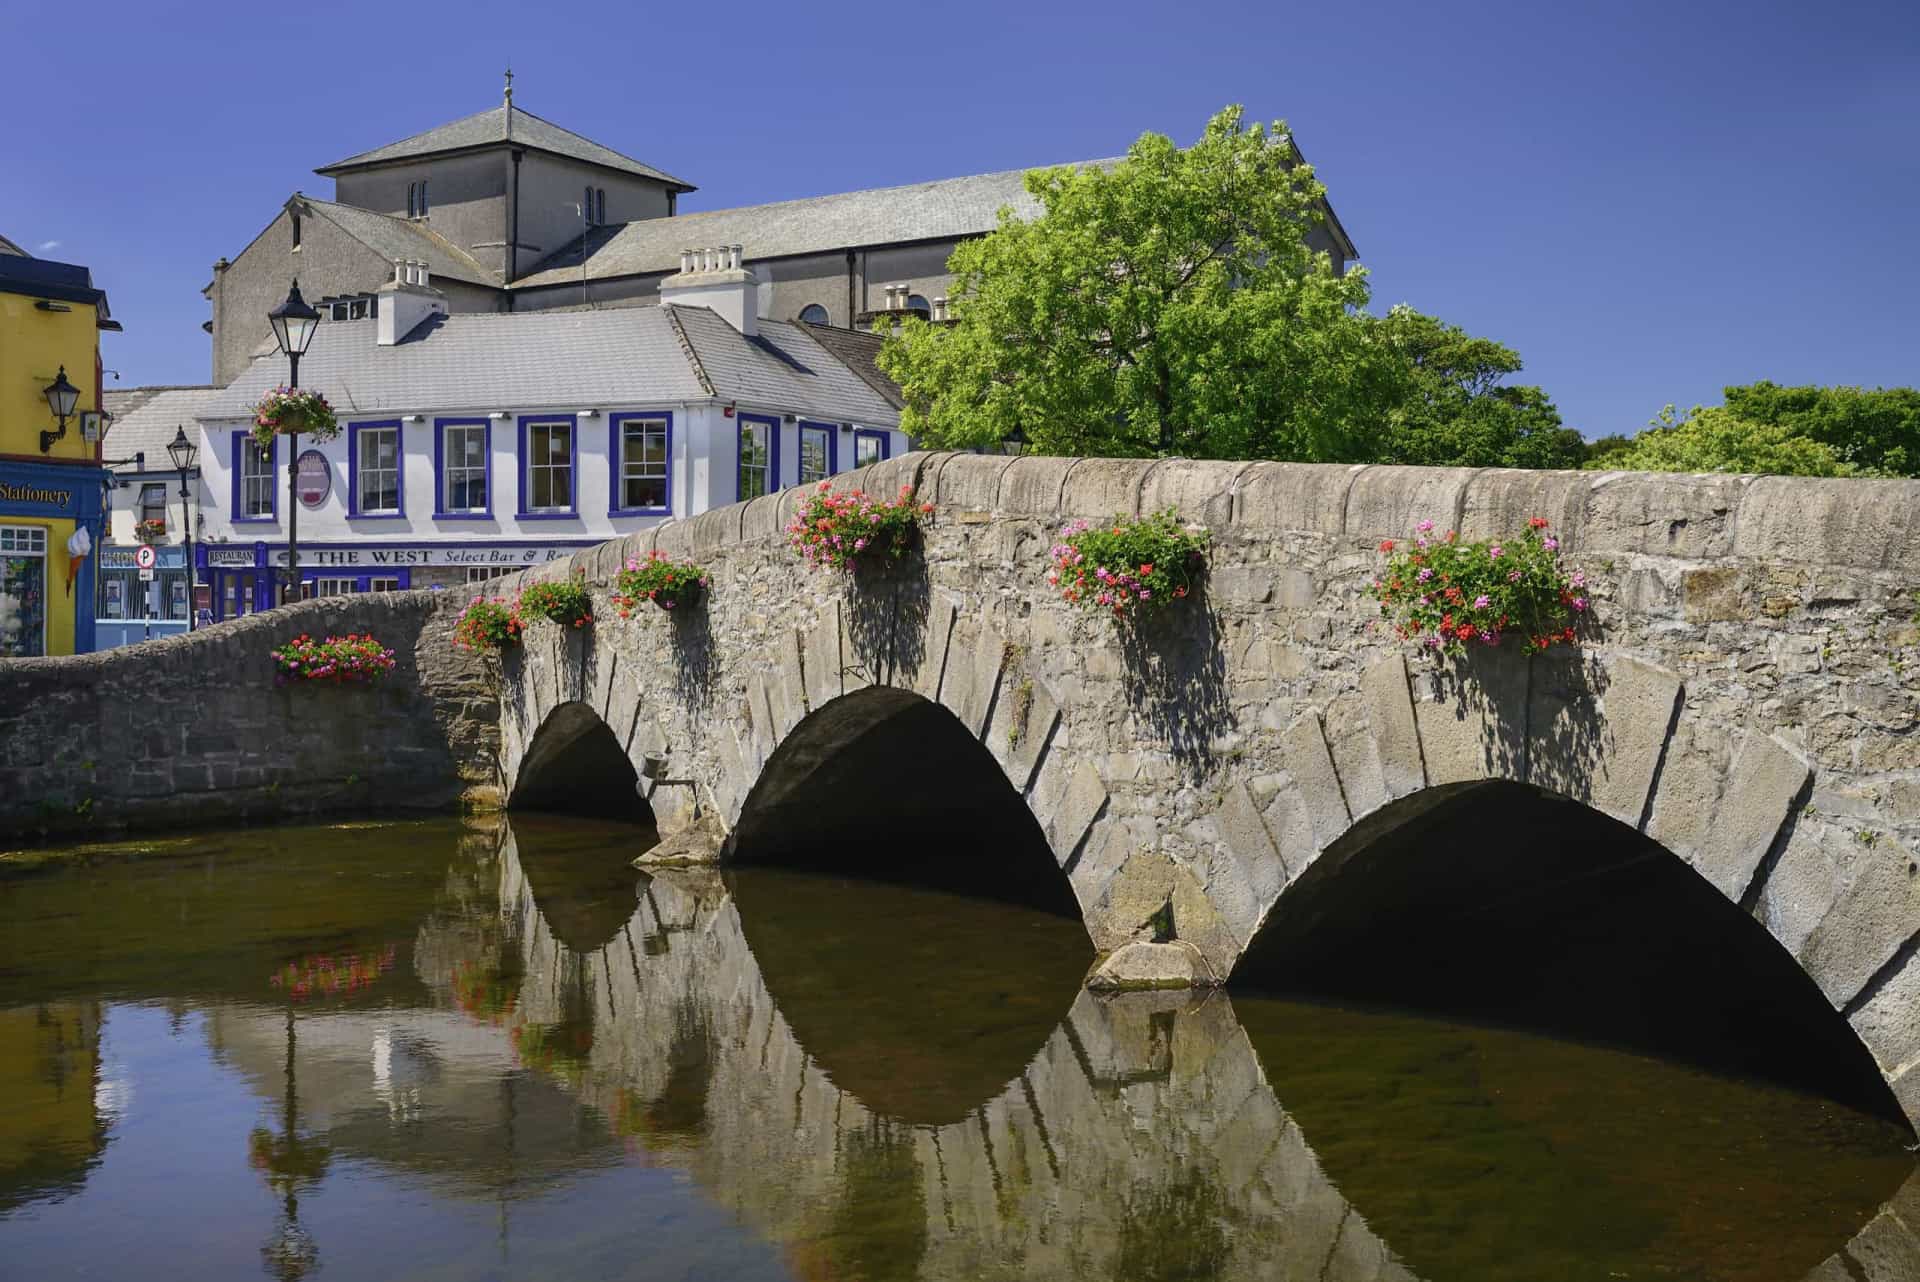 <p>The Carrowbeg river flows through Westport, a handsome town laid out in the Georgian architectural style. A tree-lined promenade known as the Mall runs along the river, which is spanned by several stone bridges.</p>